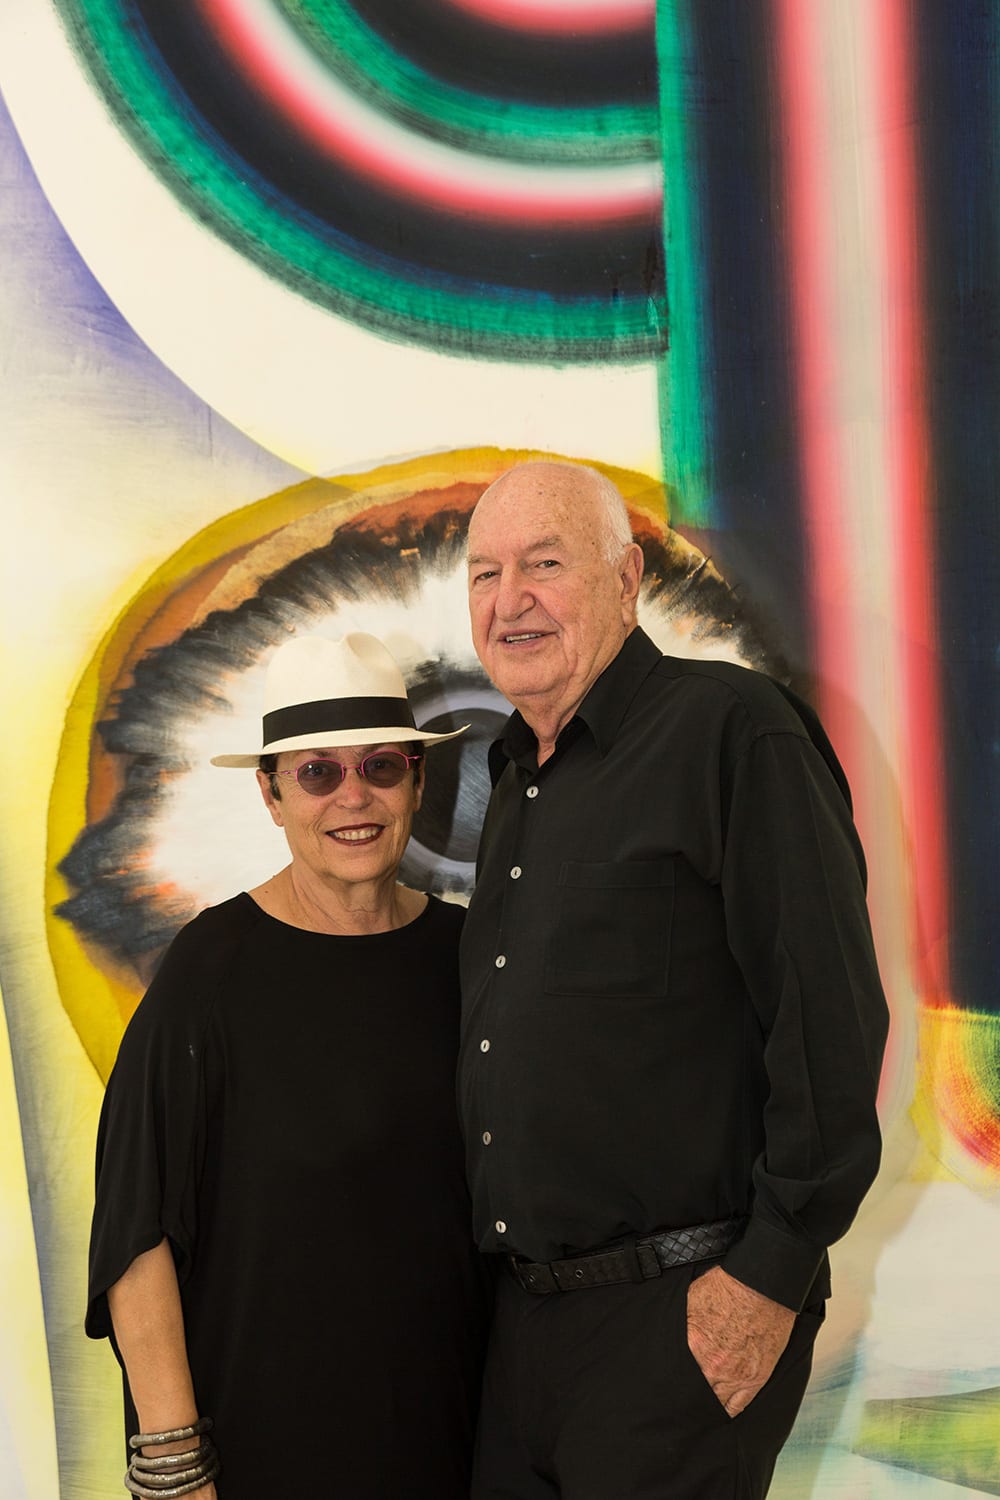 Mera and Don Rubell in front of Kerstin Brätsch’s artwork When You See Me Again It Wont Be Me (from Broadwaybratsch/Corporate Abstraction series), 2010. Photo Credit: Chi Lam.